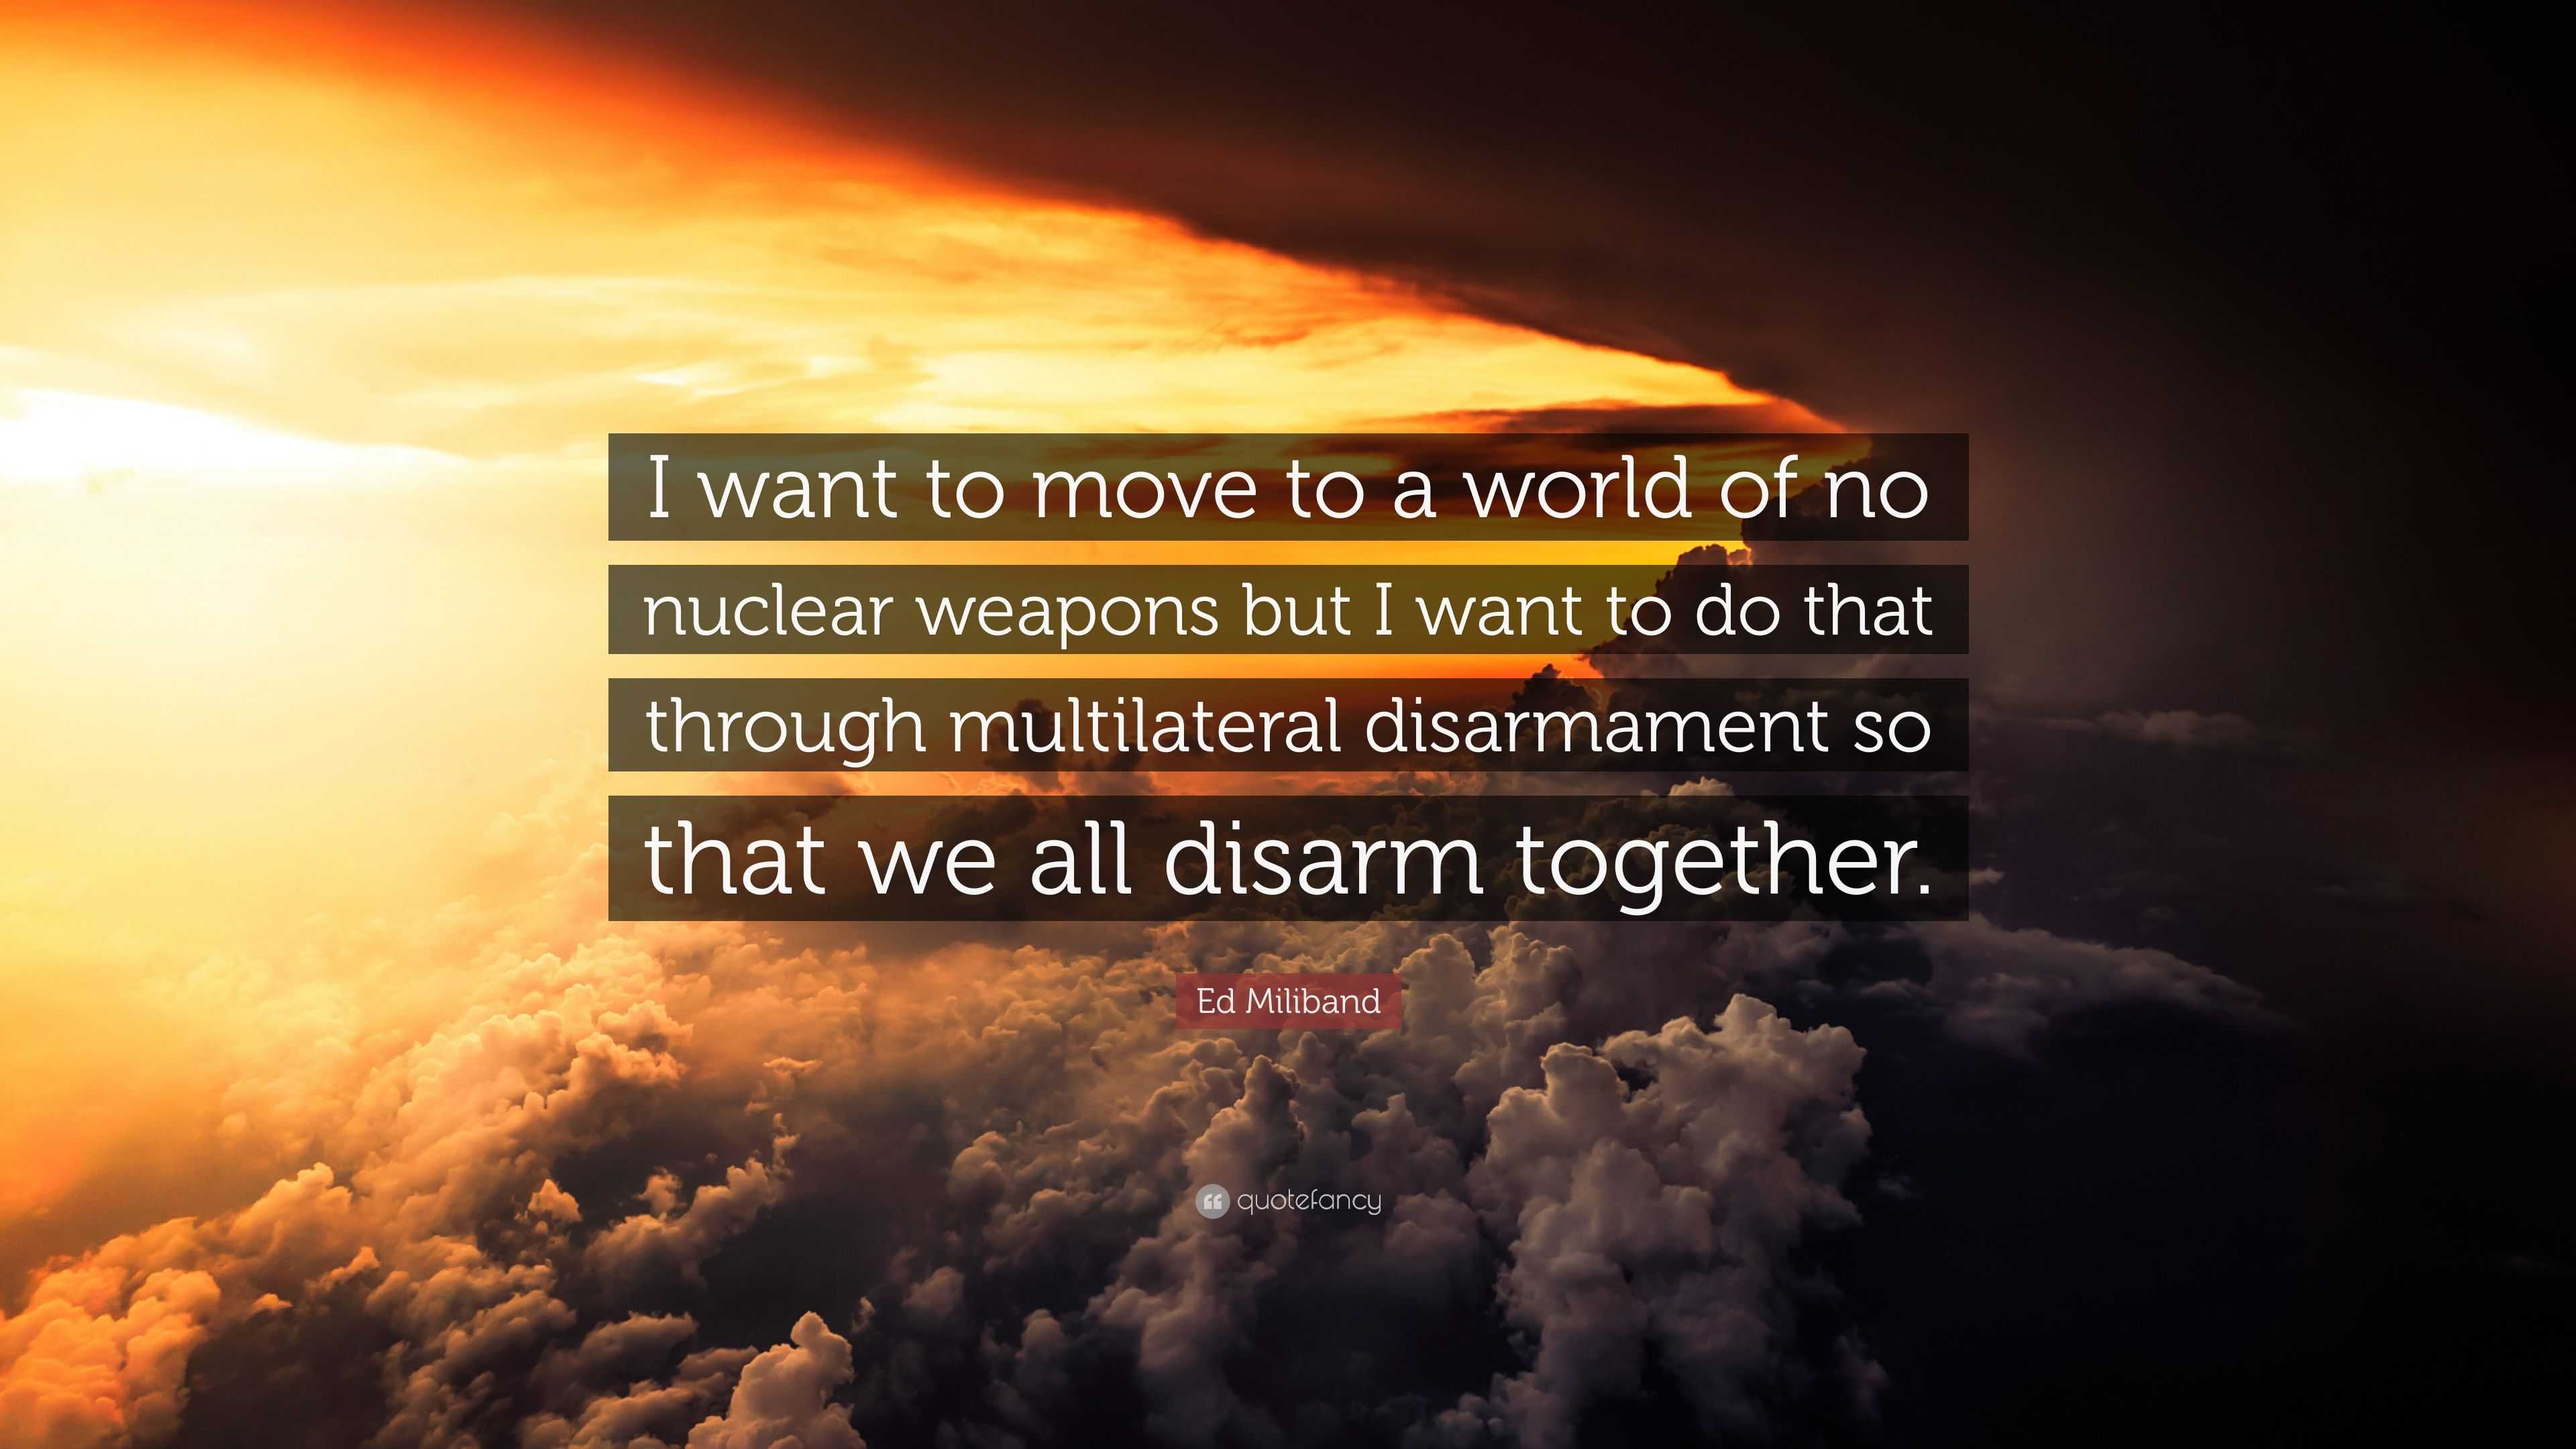 Ed Miliband Quote “i Want To Move To A World Of No Nuclear Weapons But I Want To Do That